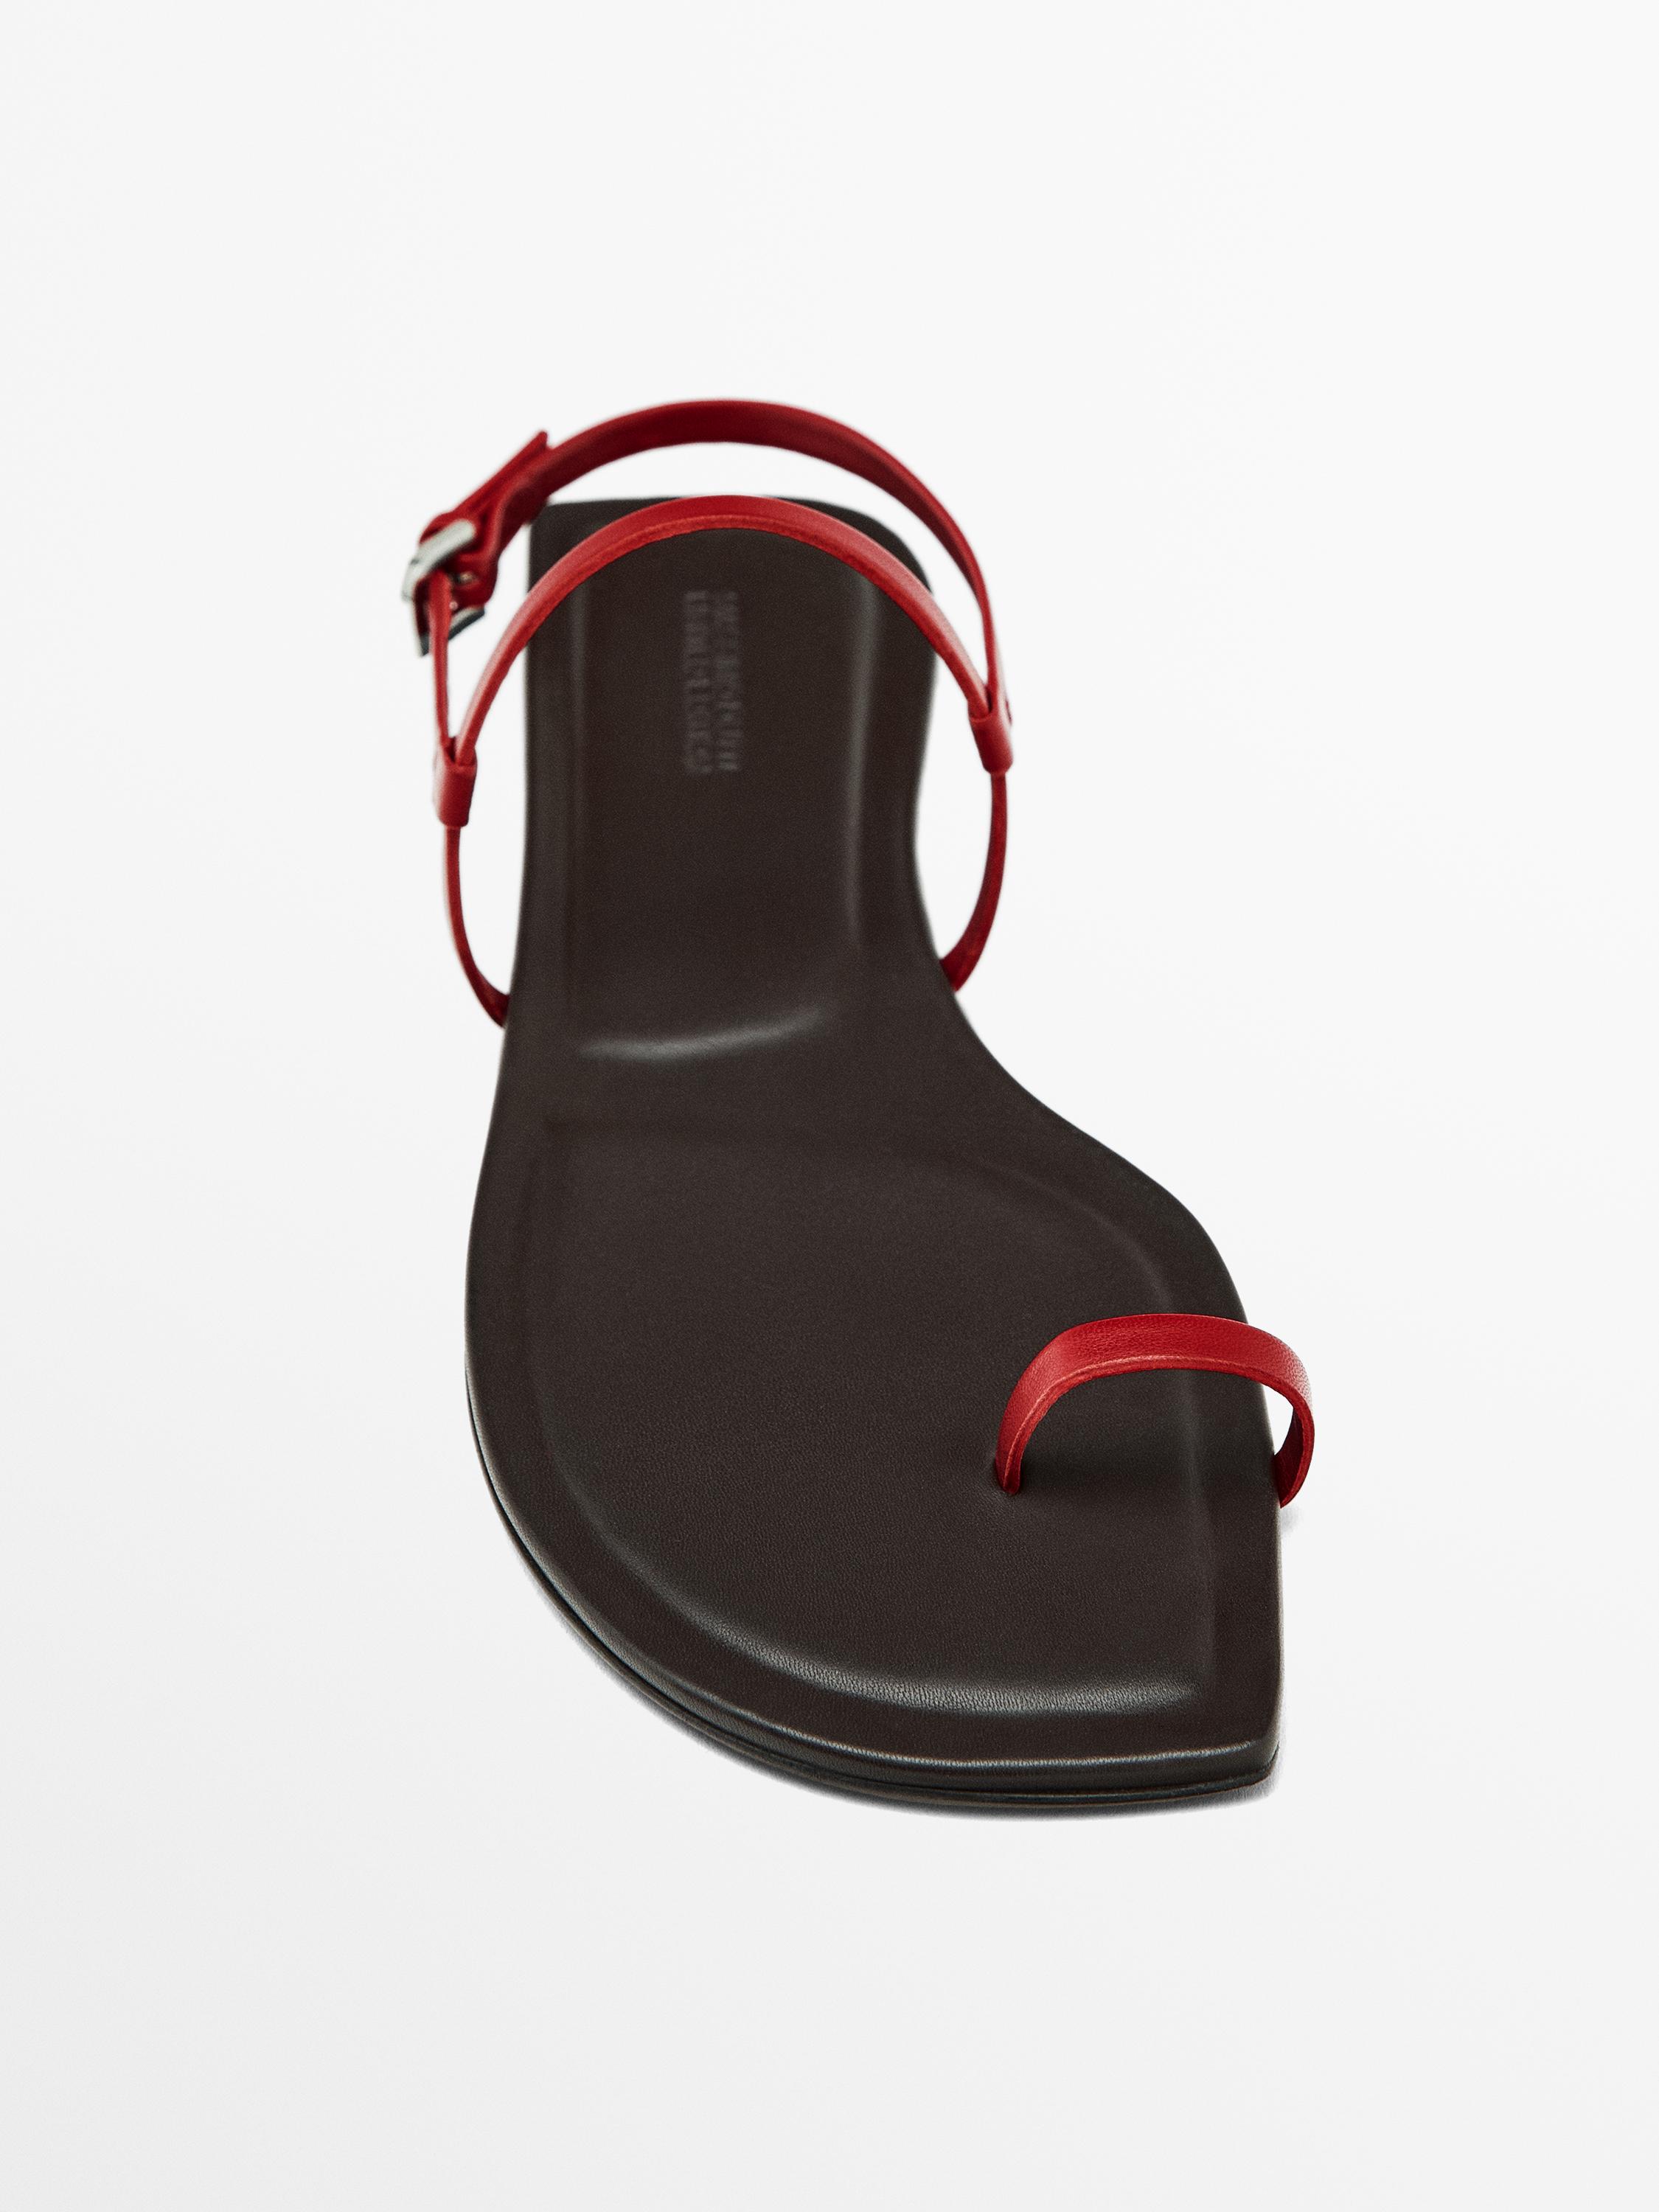 Flat sandals - Limited Edition - Red | ZARA United States